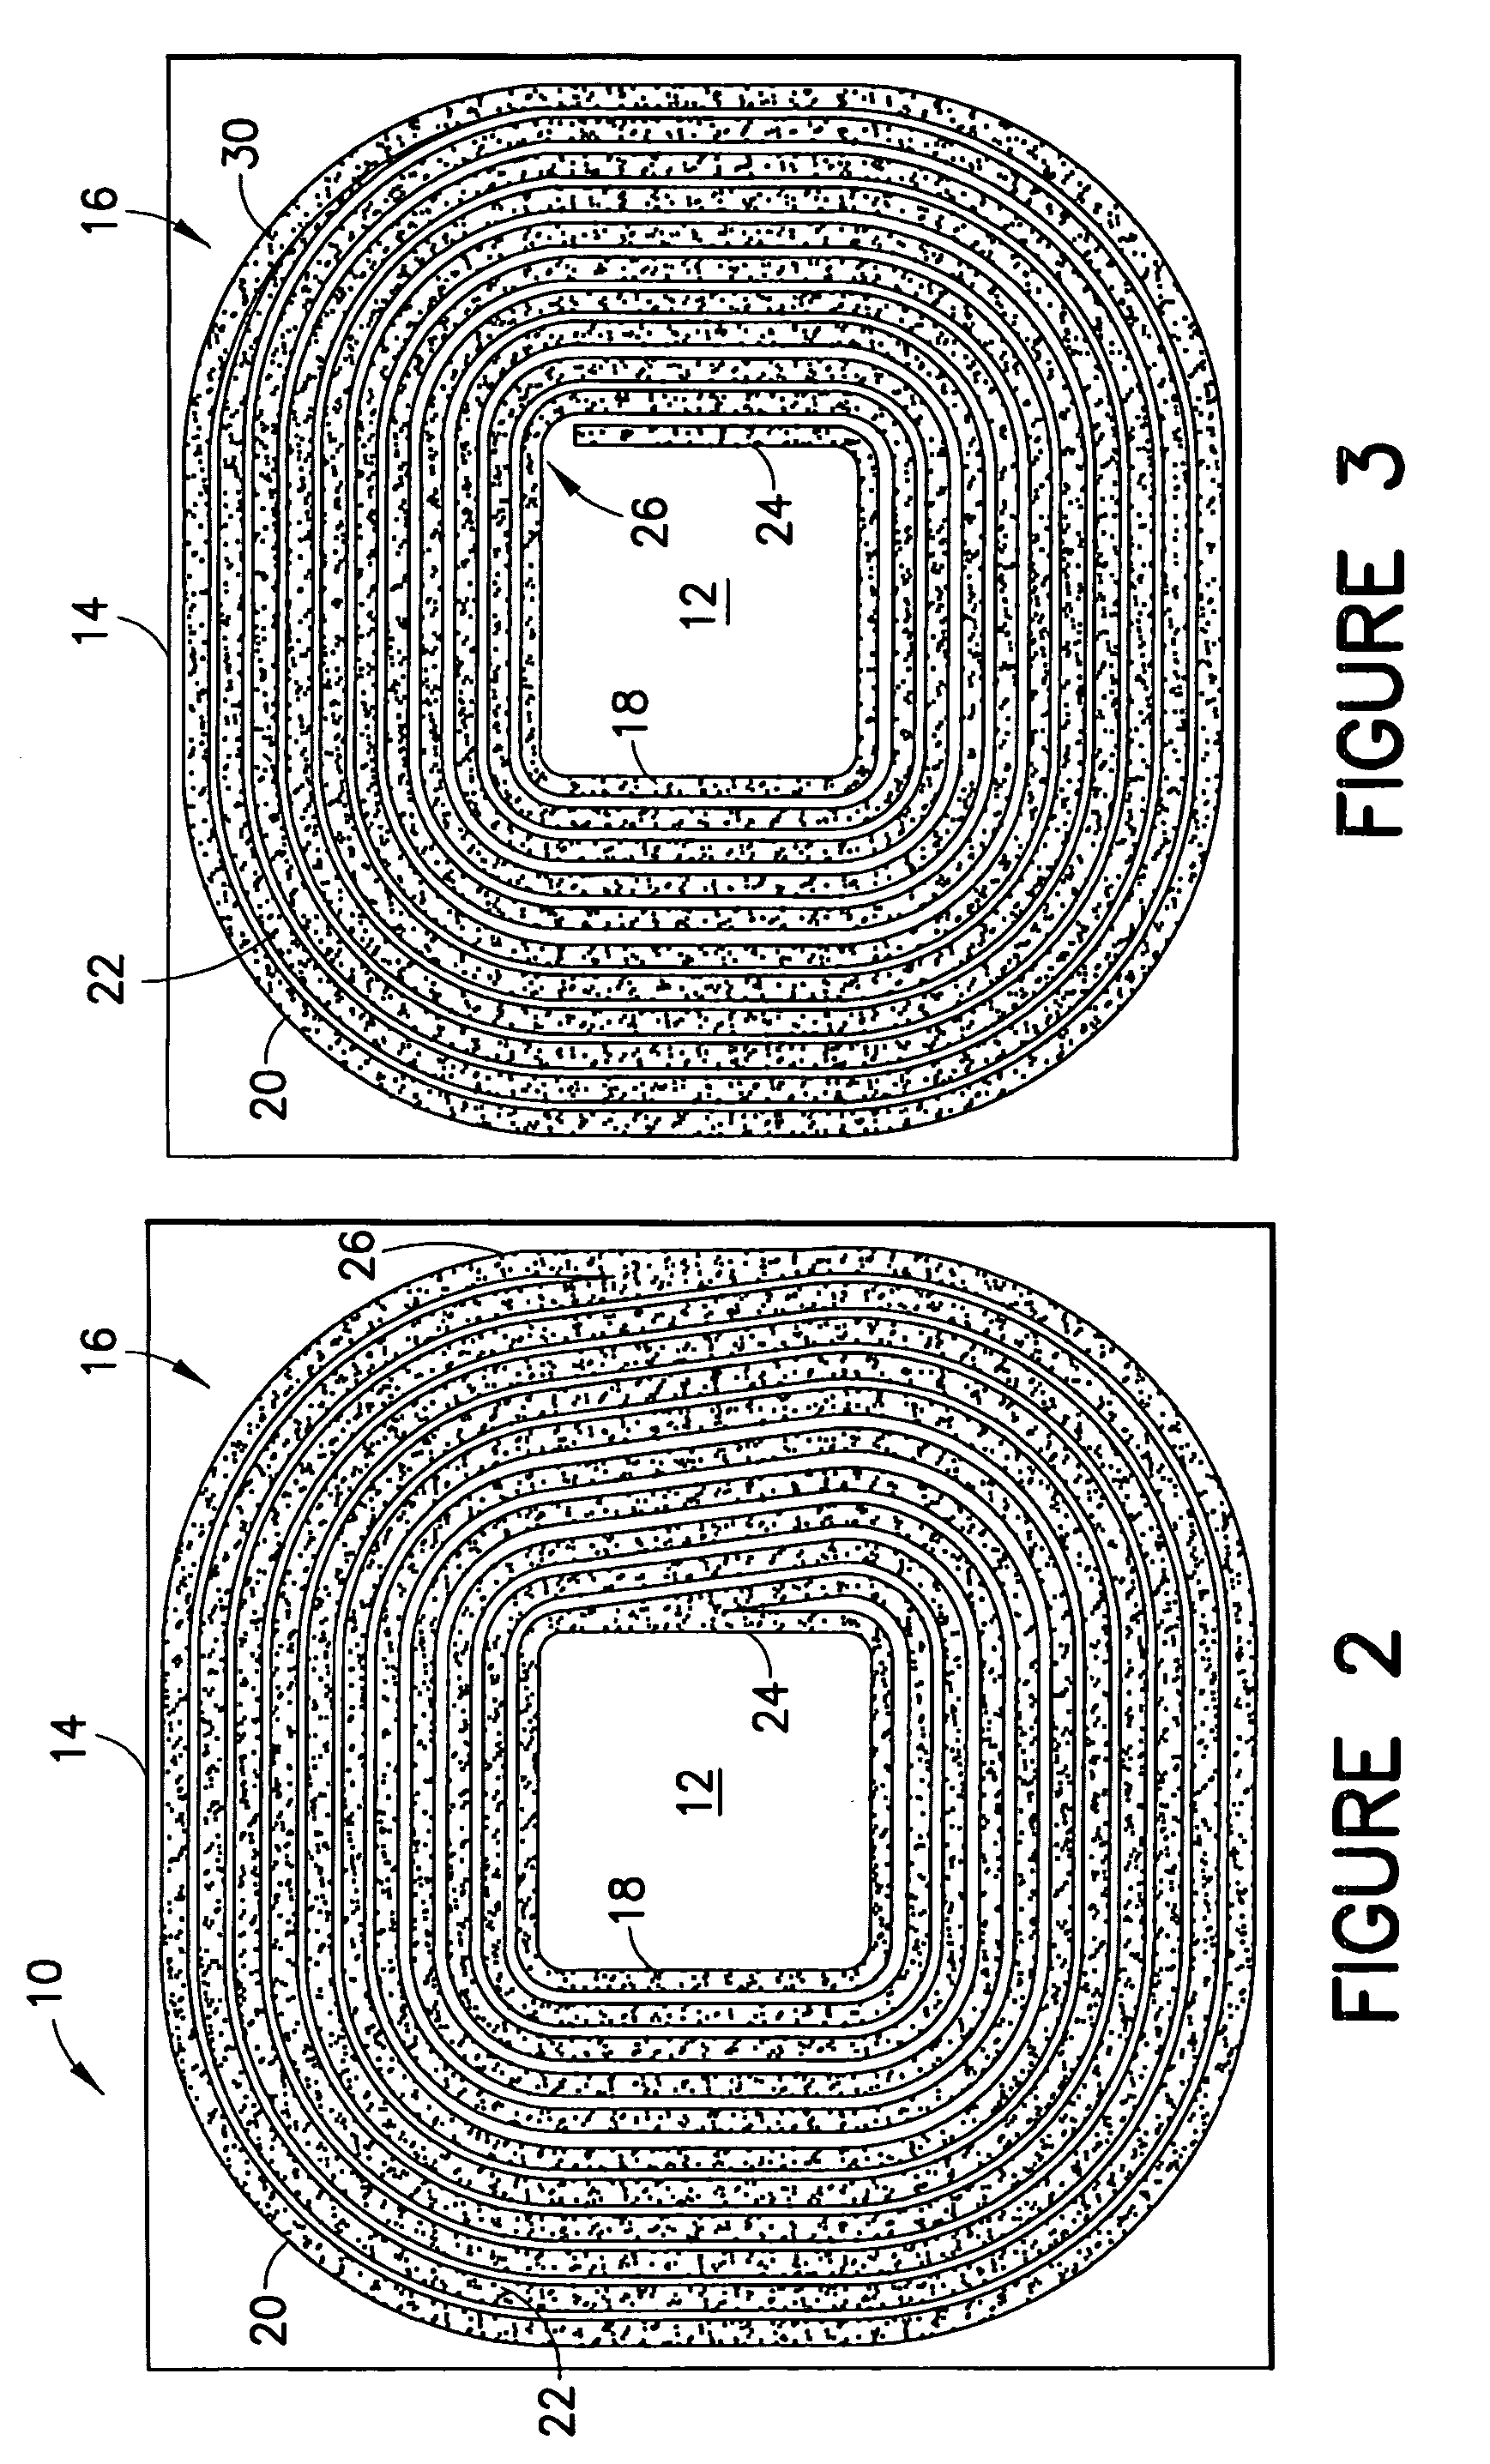 Passivation structure with voltage equalizing loops